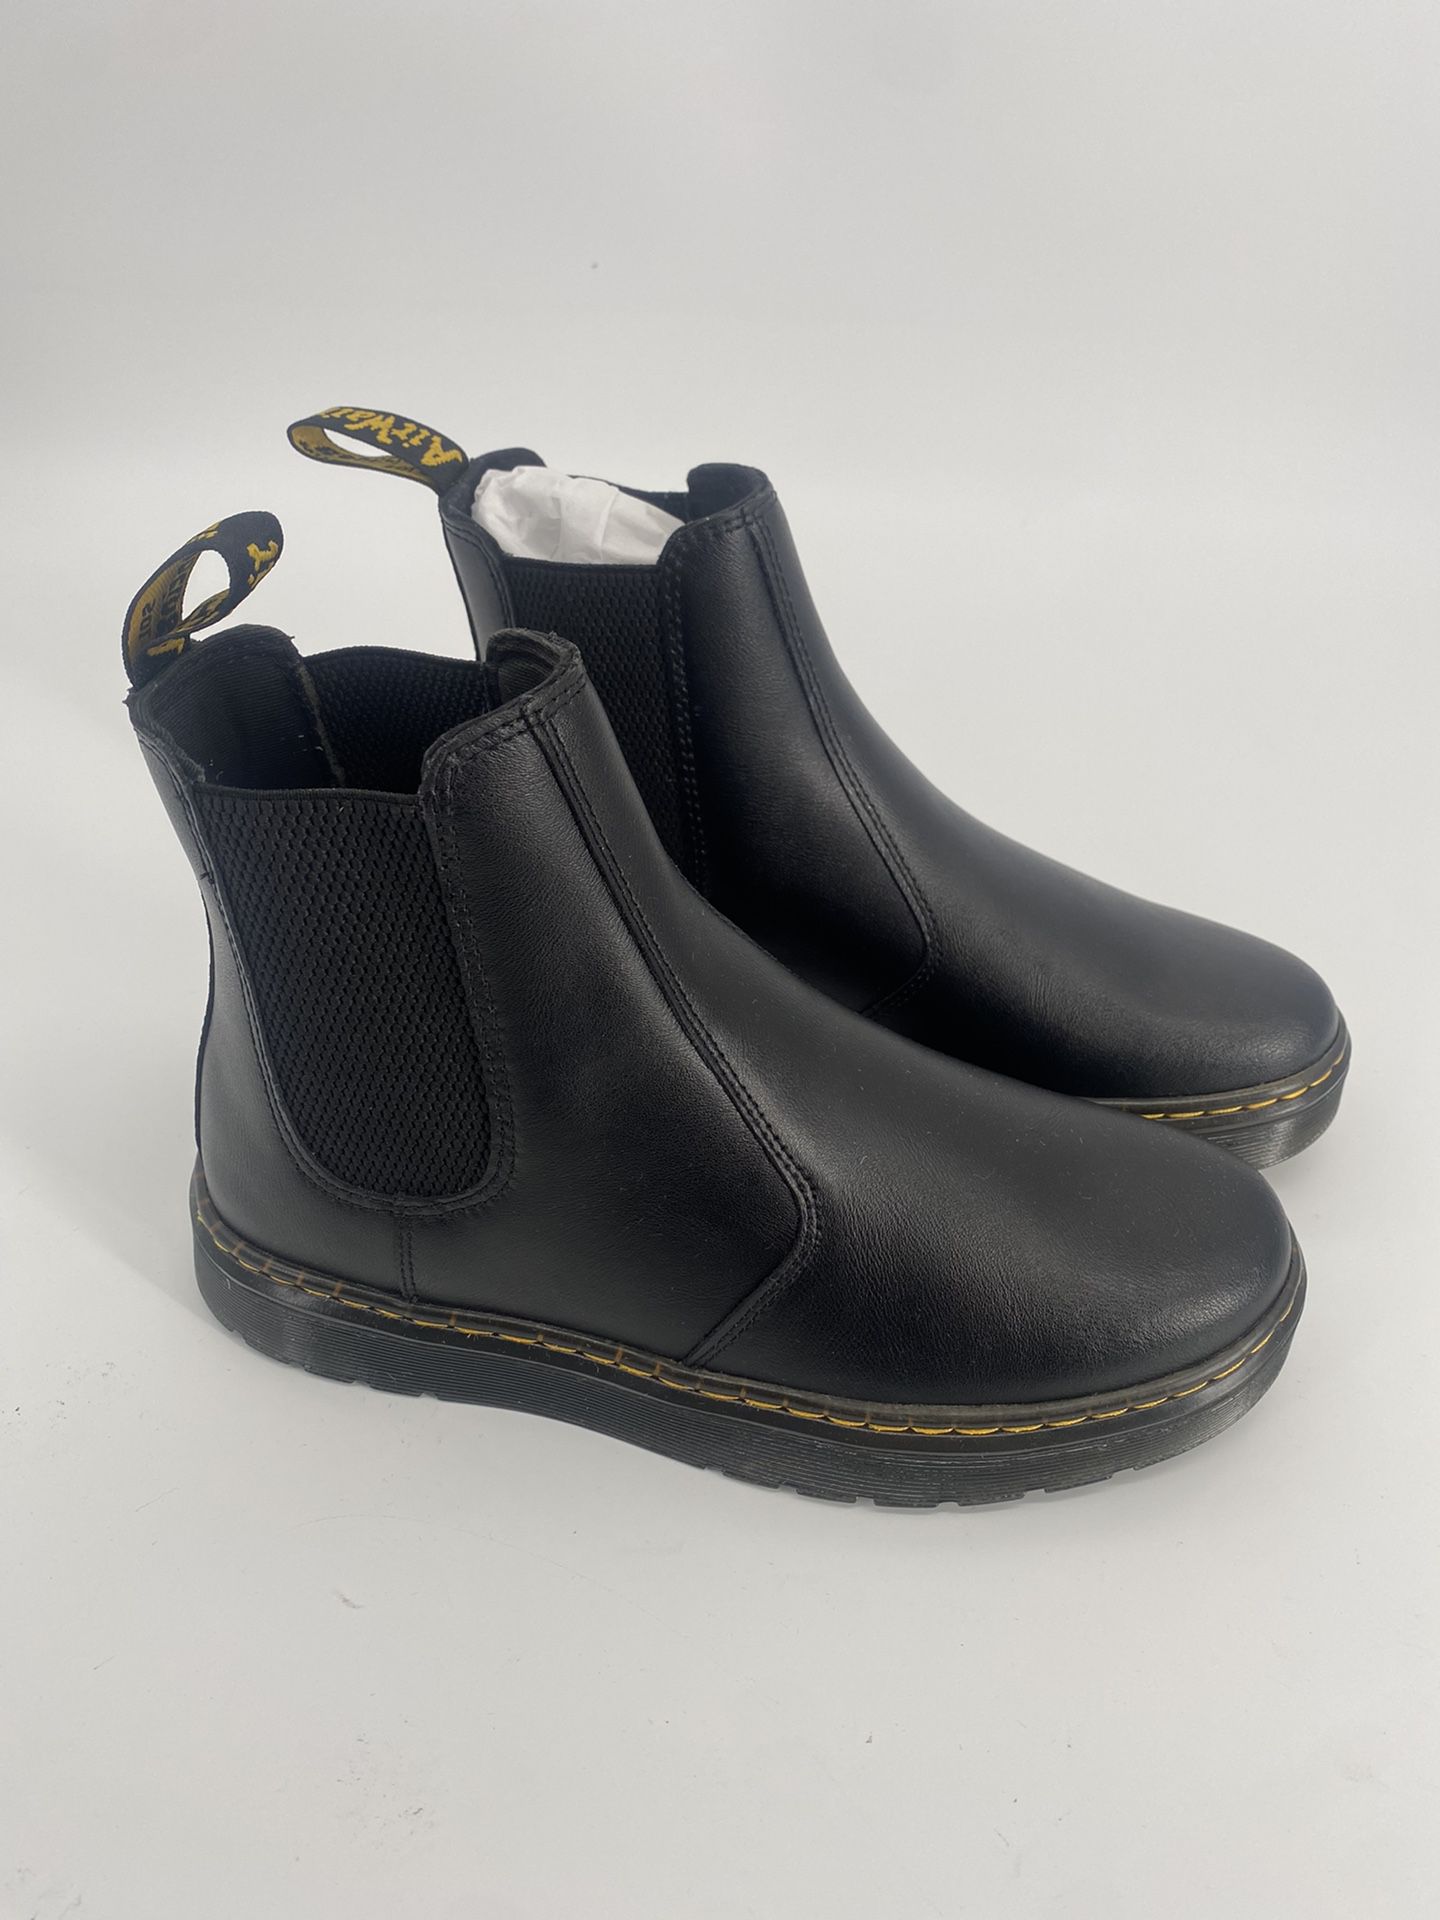 Doc Martens Dr Martens  Chelsea PULL ON Boots, SIZE W 8/7M NEW NO BOX